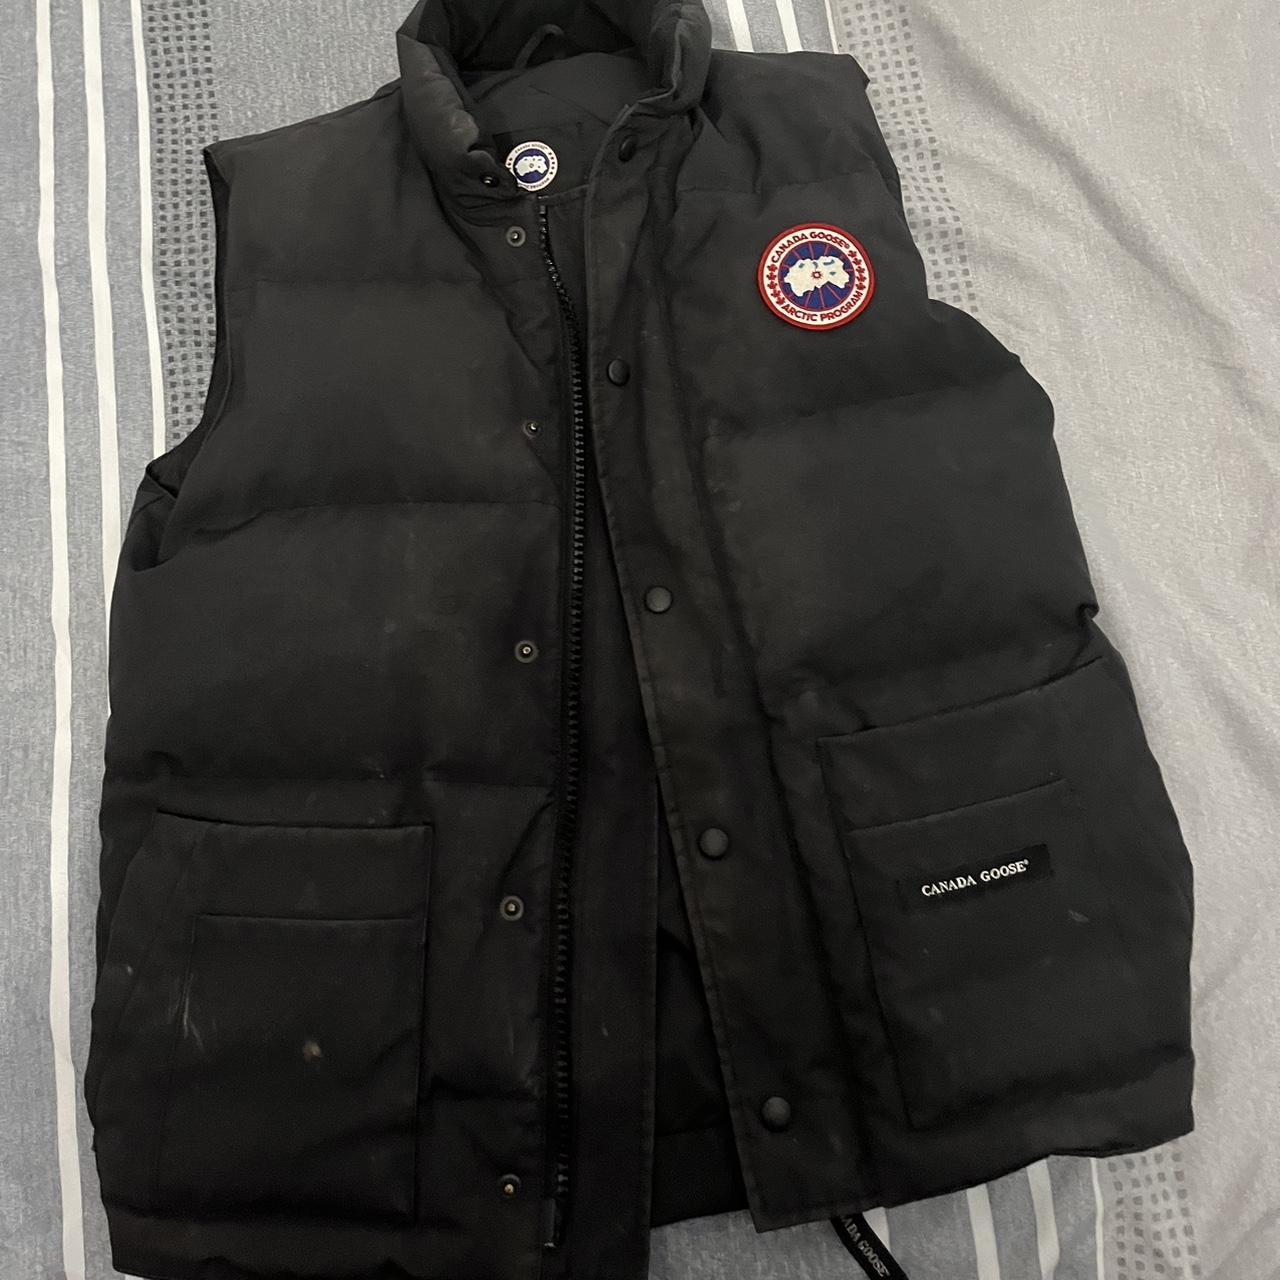 Canada goose Gilet Used but to small now Size S... - Depop